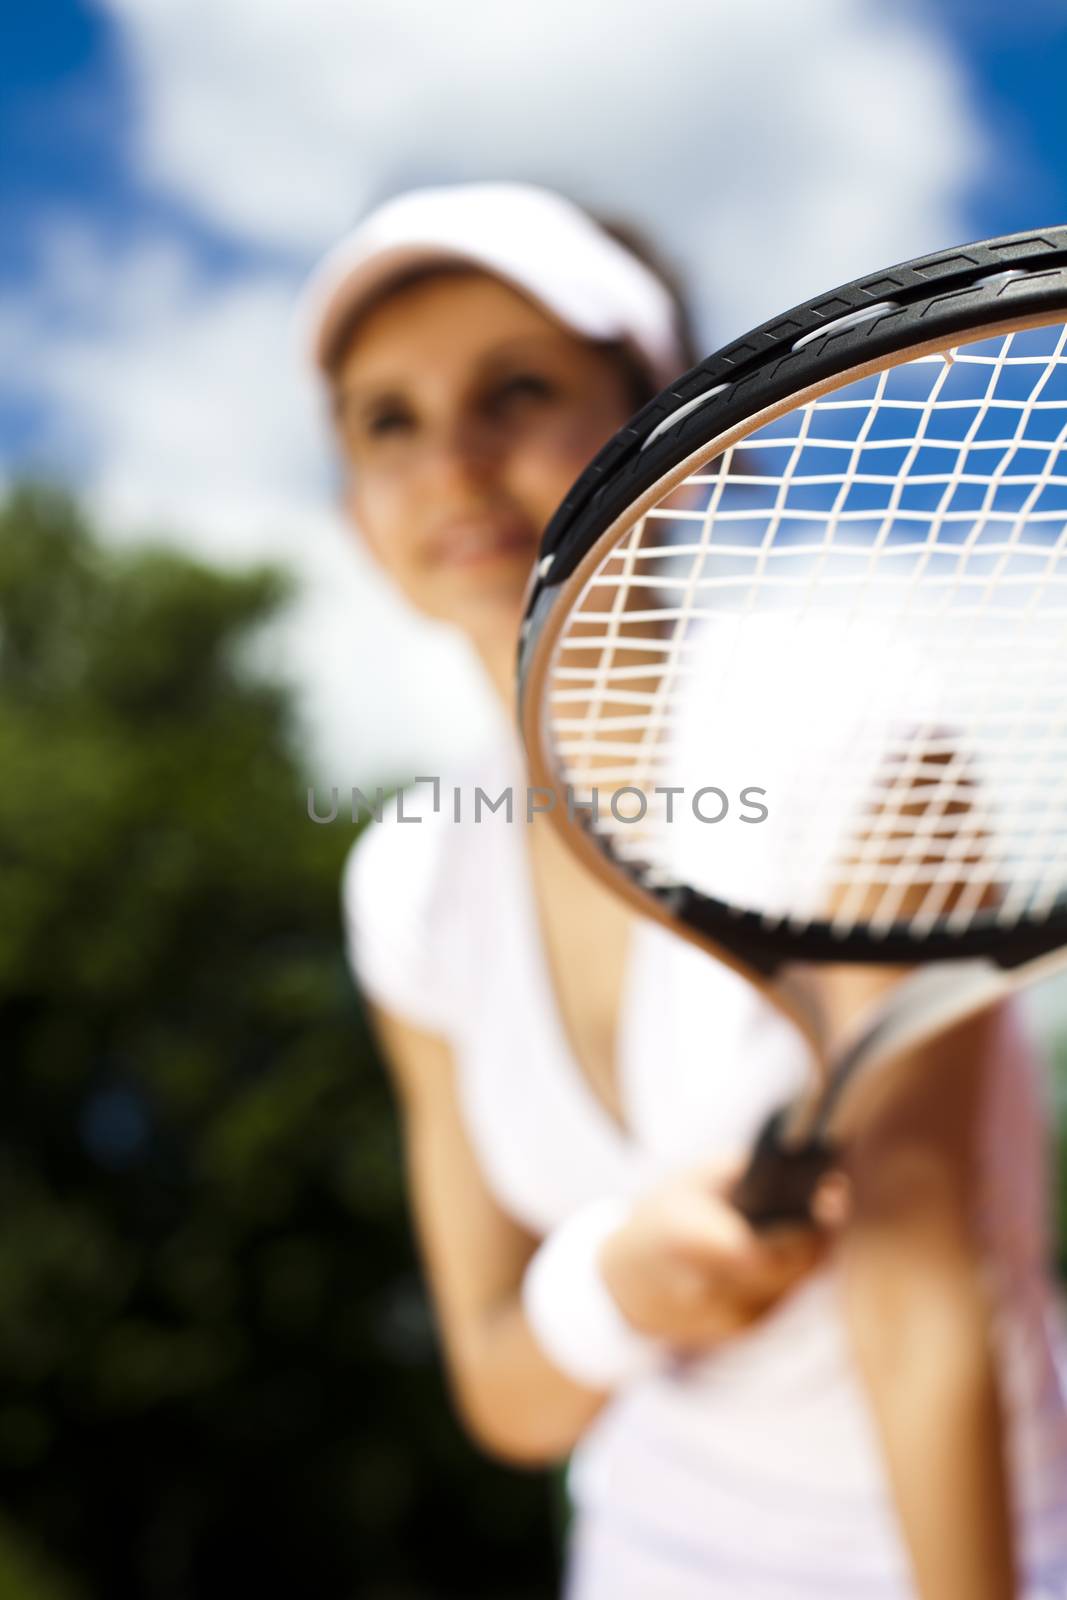 Tennis player, natural colorful tone by JanPietruszka